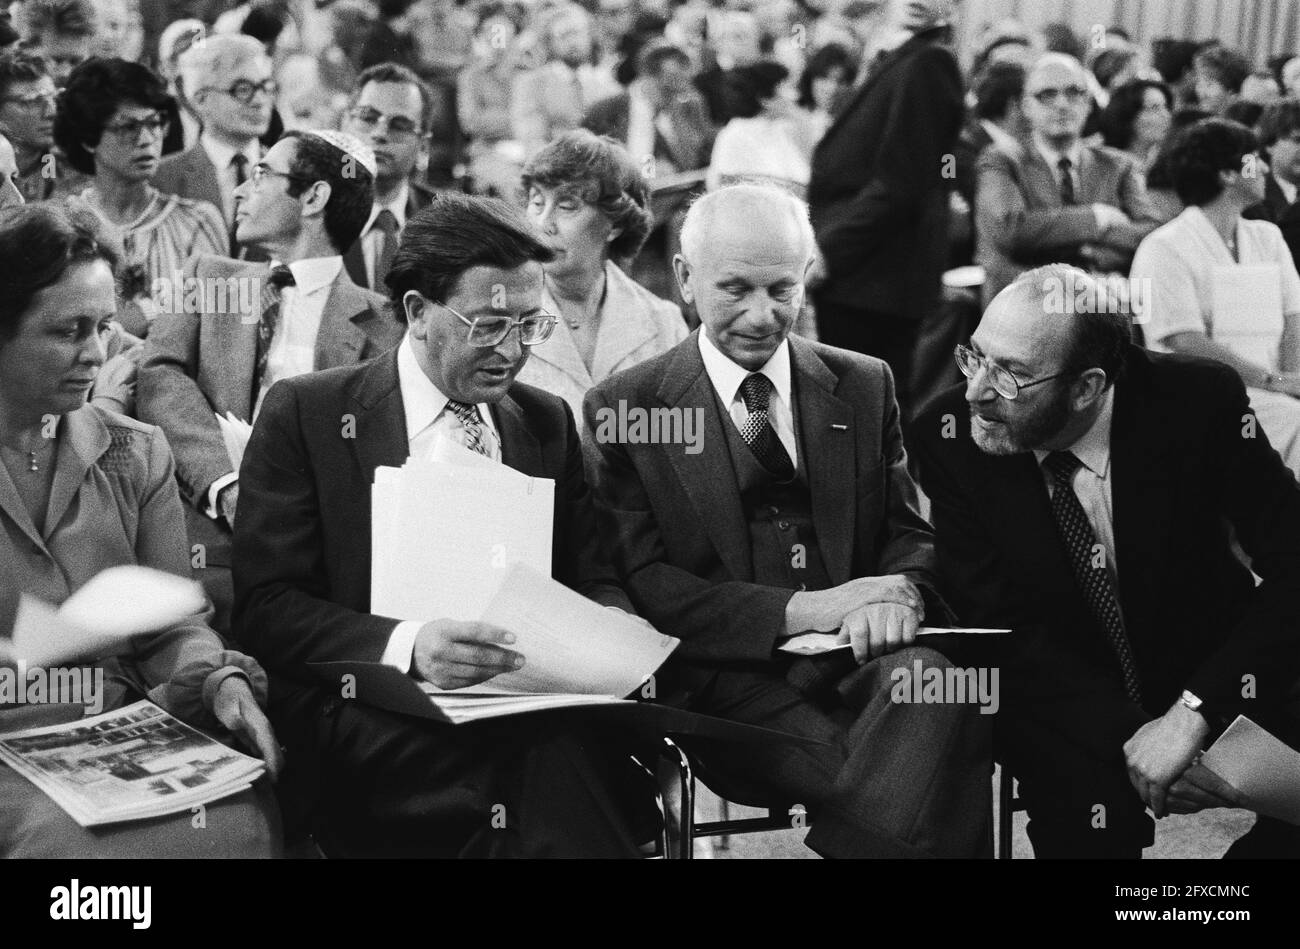 Pais opens lyceum Maimonides in Amsterdam; r., I. Pais (father of the minister and former best.member St. Joods Scholengemeenschap) Stuiver, May 28, 1980, LYCEA, ministers, openings, The Netherlands, 20th century press agency photo, news to remember, documentary, historic photography 1945-1990, visual stories, human history of the Twentieth Century, capturing moments in time Stock Photo